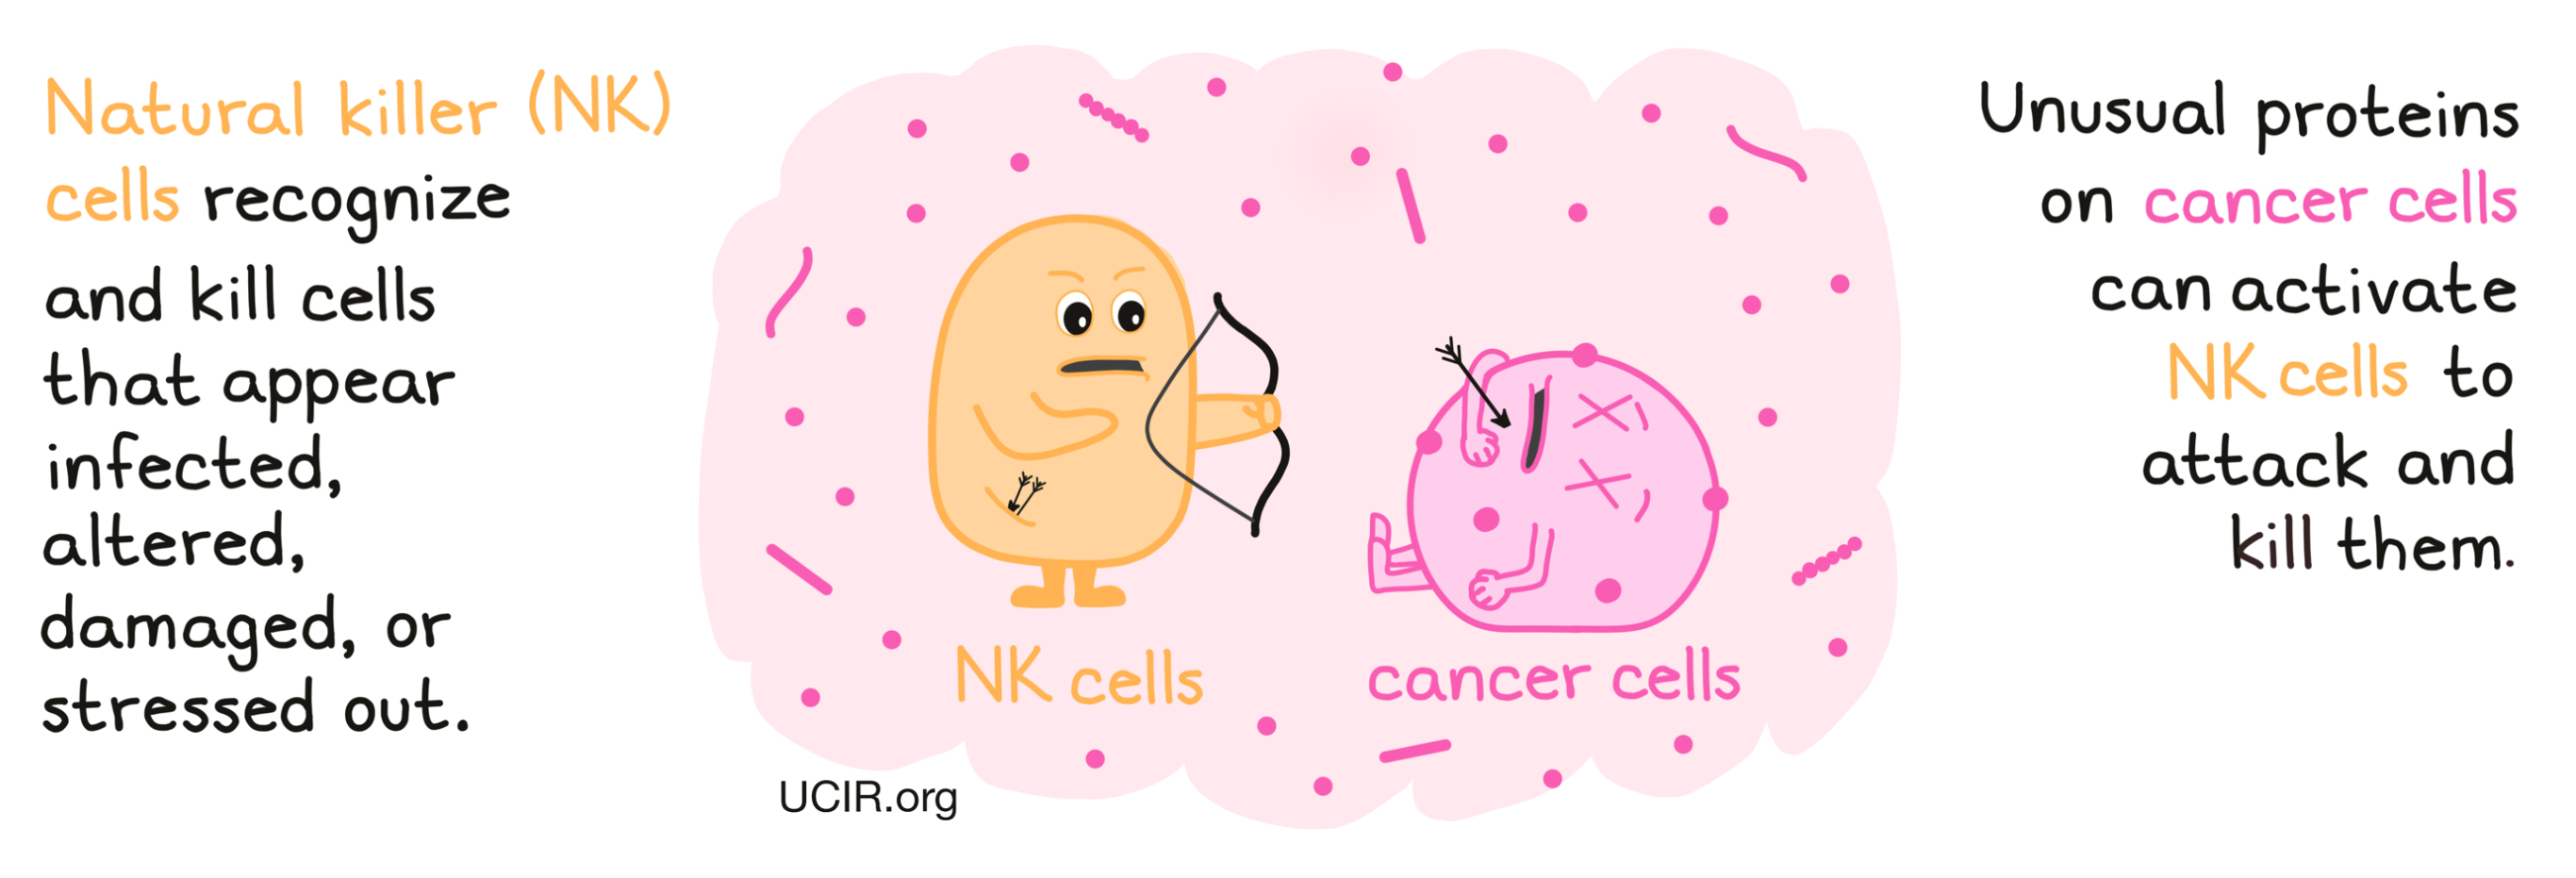 Illustration showing what NK cells do to cancer cells